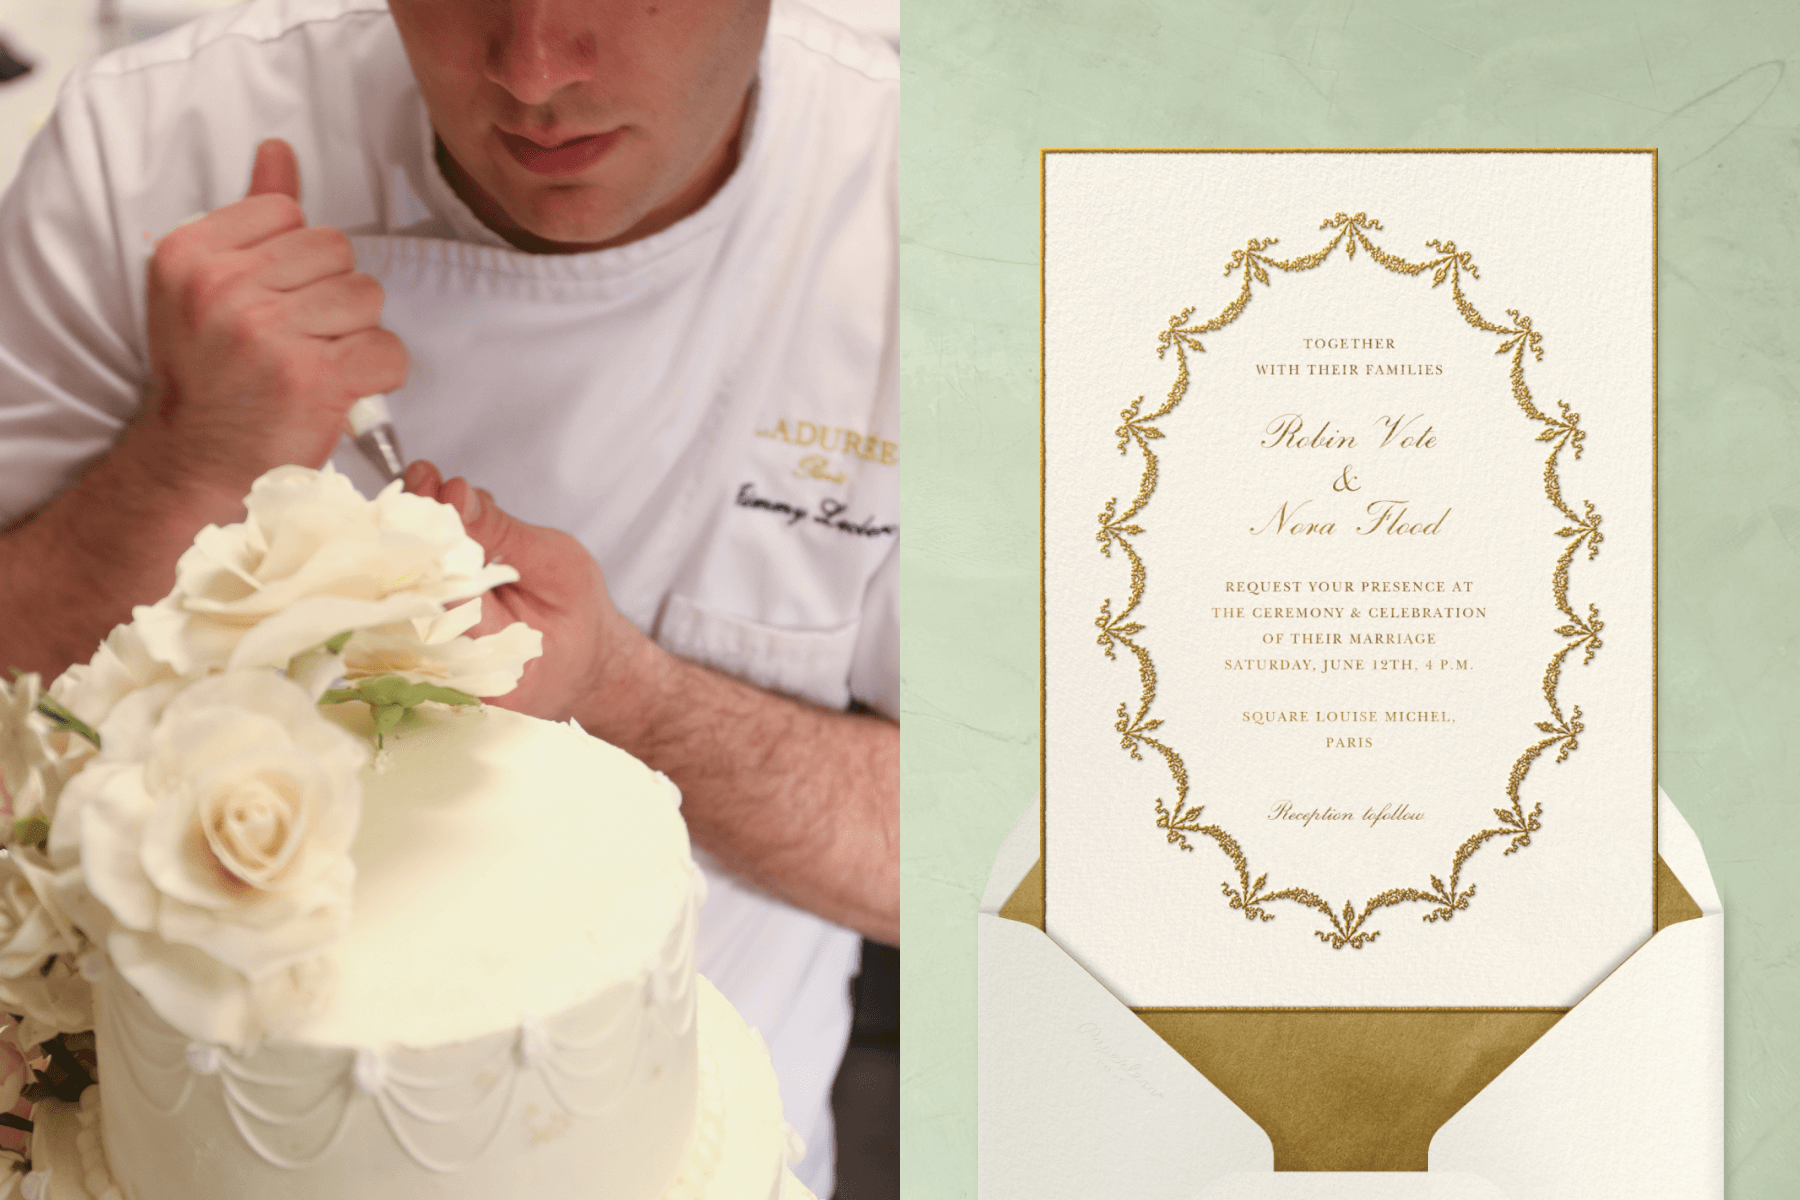 Left: A pastry chef pipes icing flowers onto wedding cake; Right: A Laduree wedding invitation that is cream colored with gold details. 